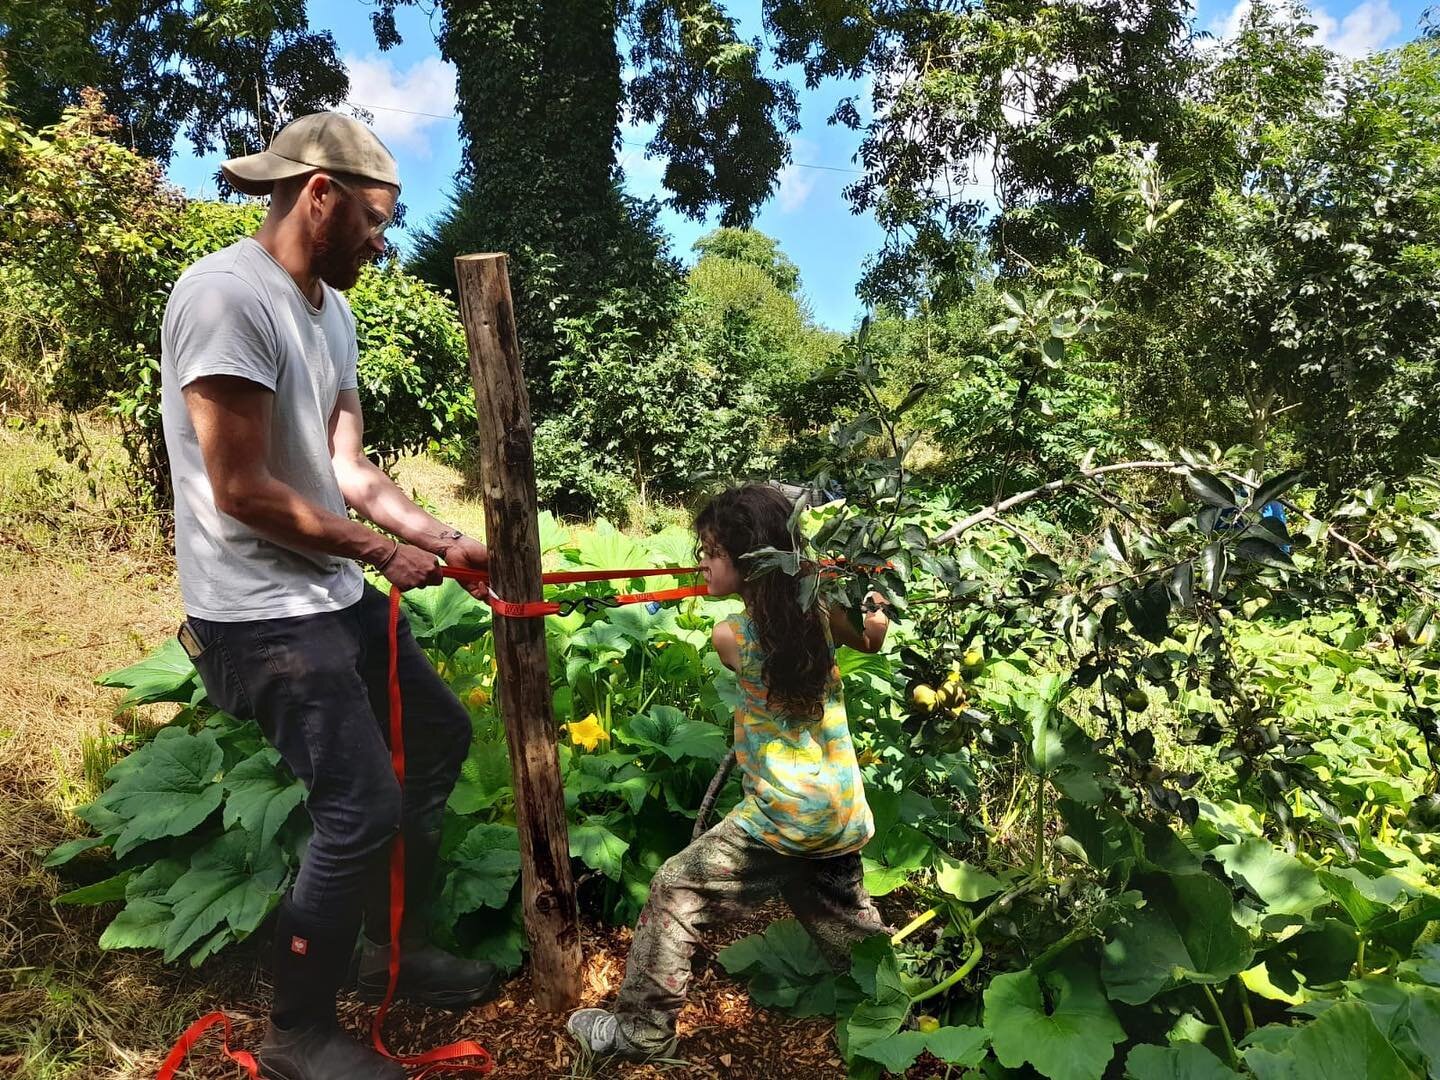 One of our young volunteers helps @abe_oakenshade persuade a heavy apple tree back upright. We should have staked it earlier!! 

Volunteer days are a great way for folks of all ages to get hands on experience in all things growing, permaculture and l